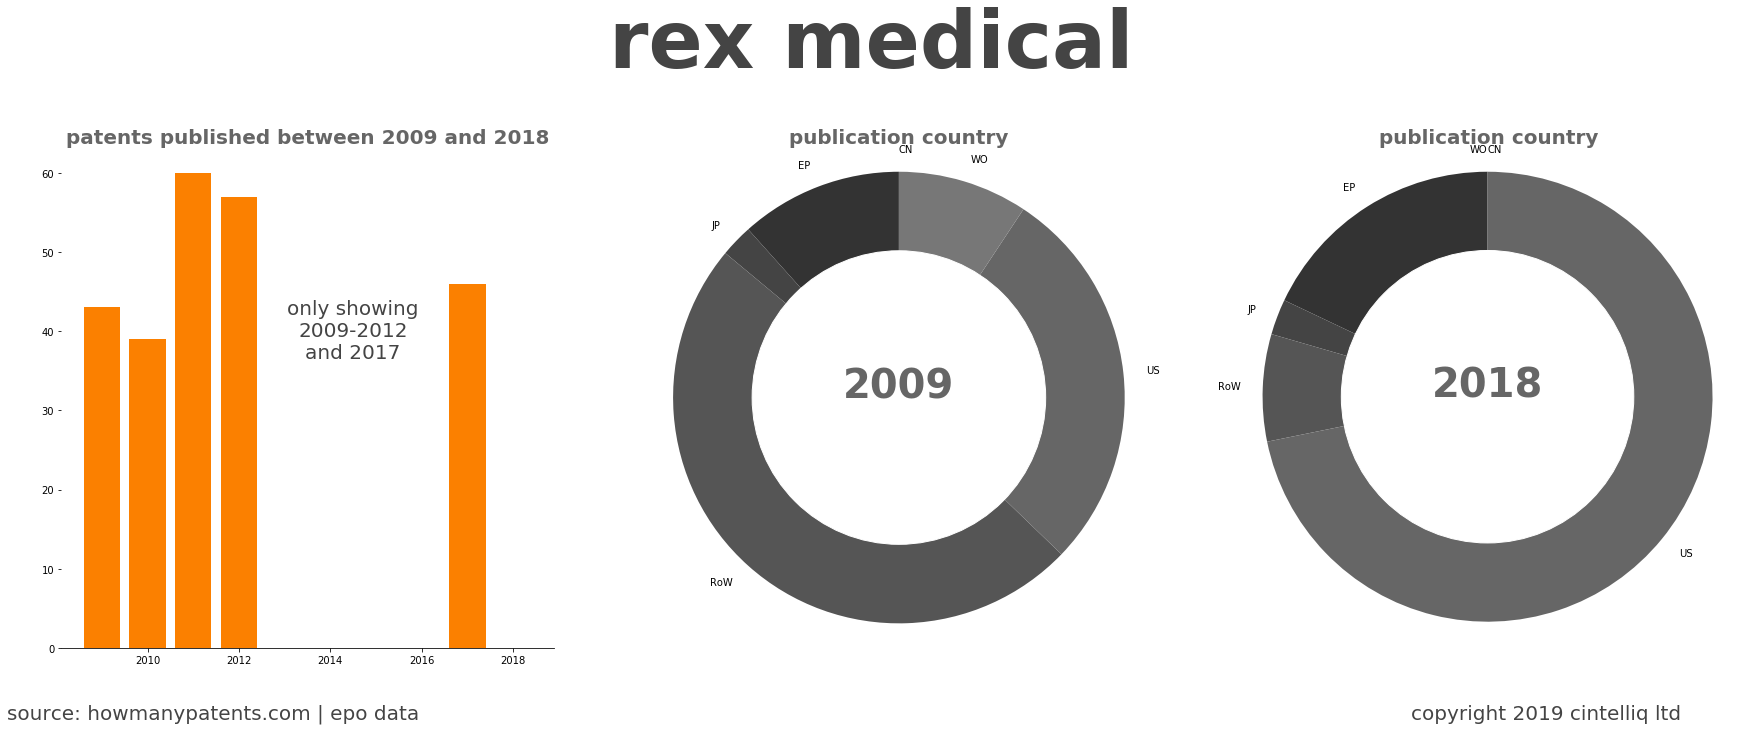 summary of patents for Rex Medical